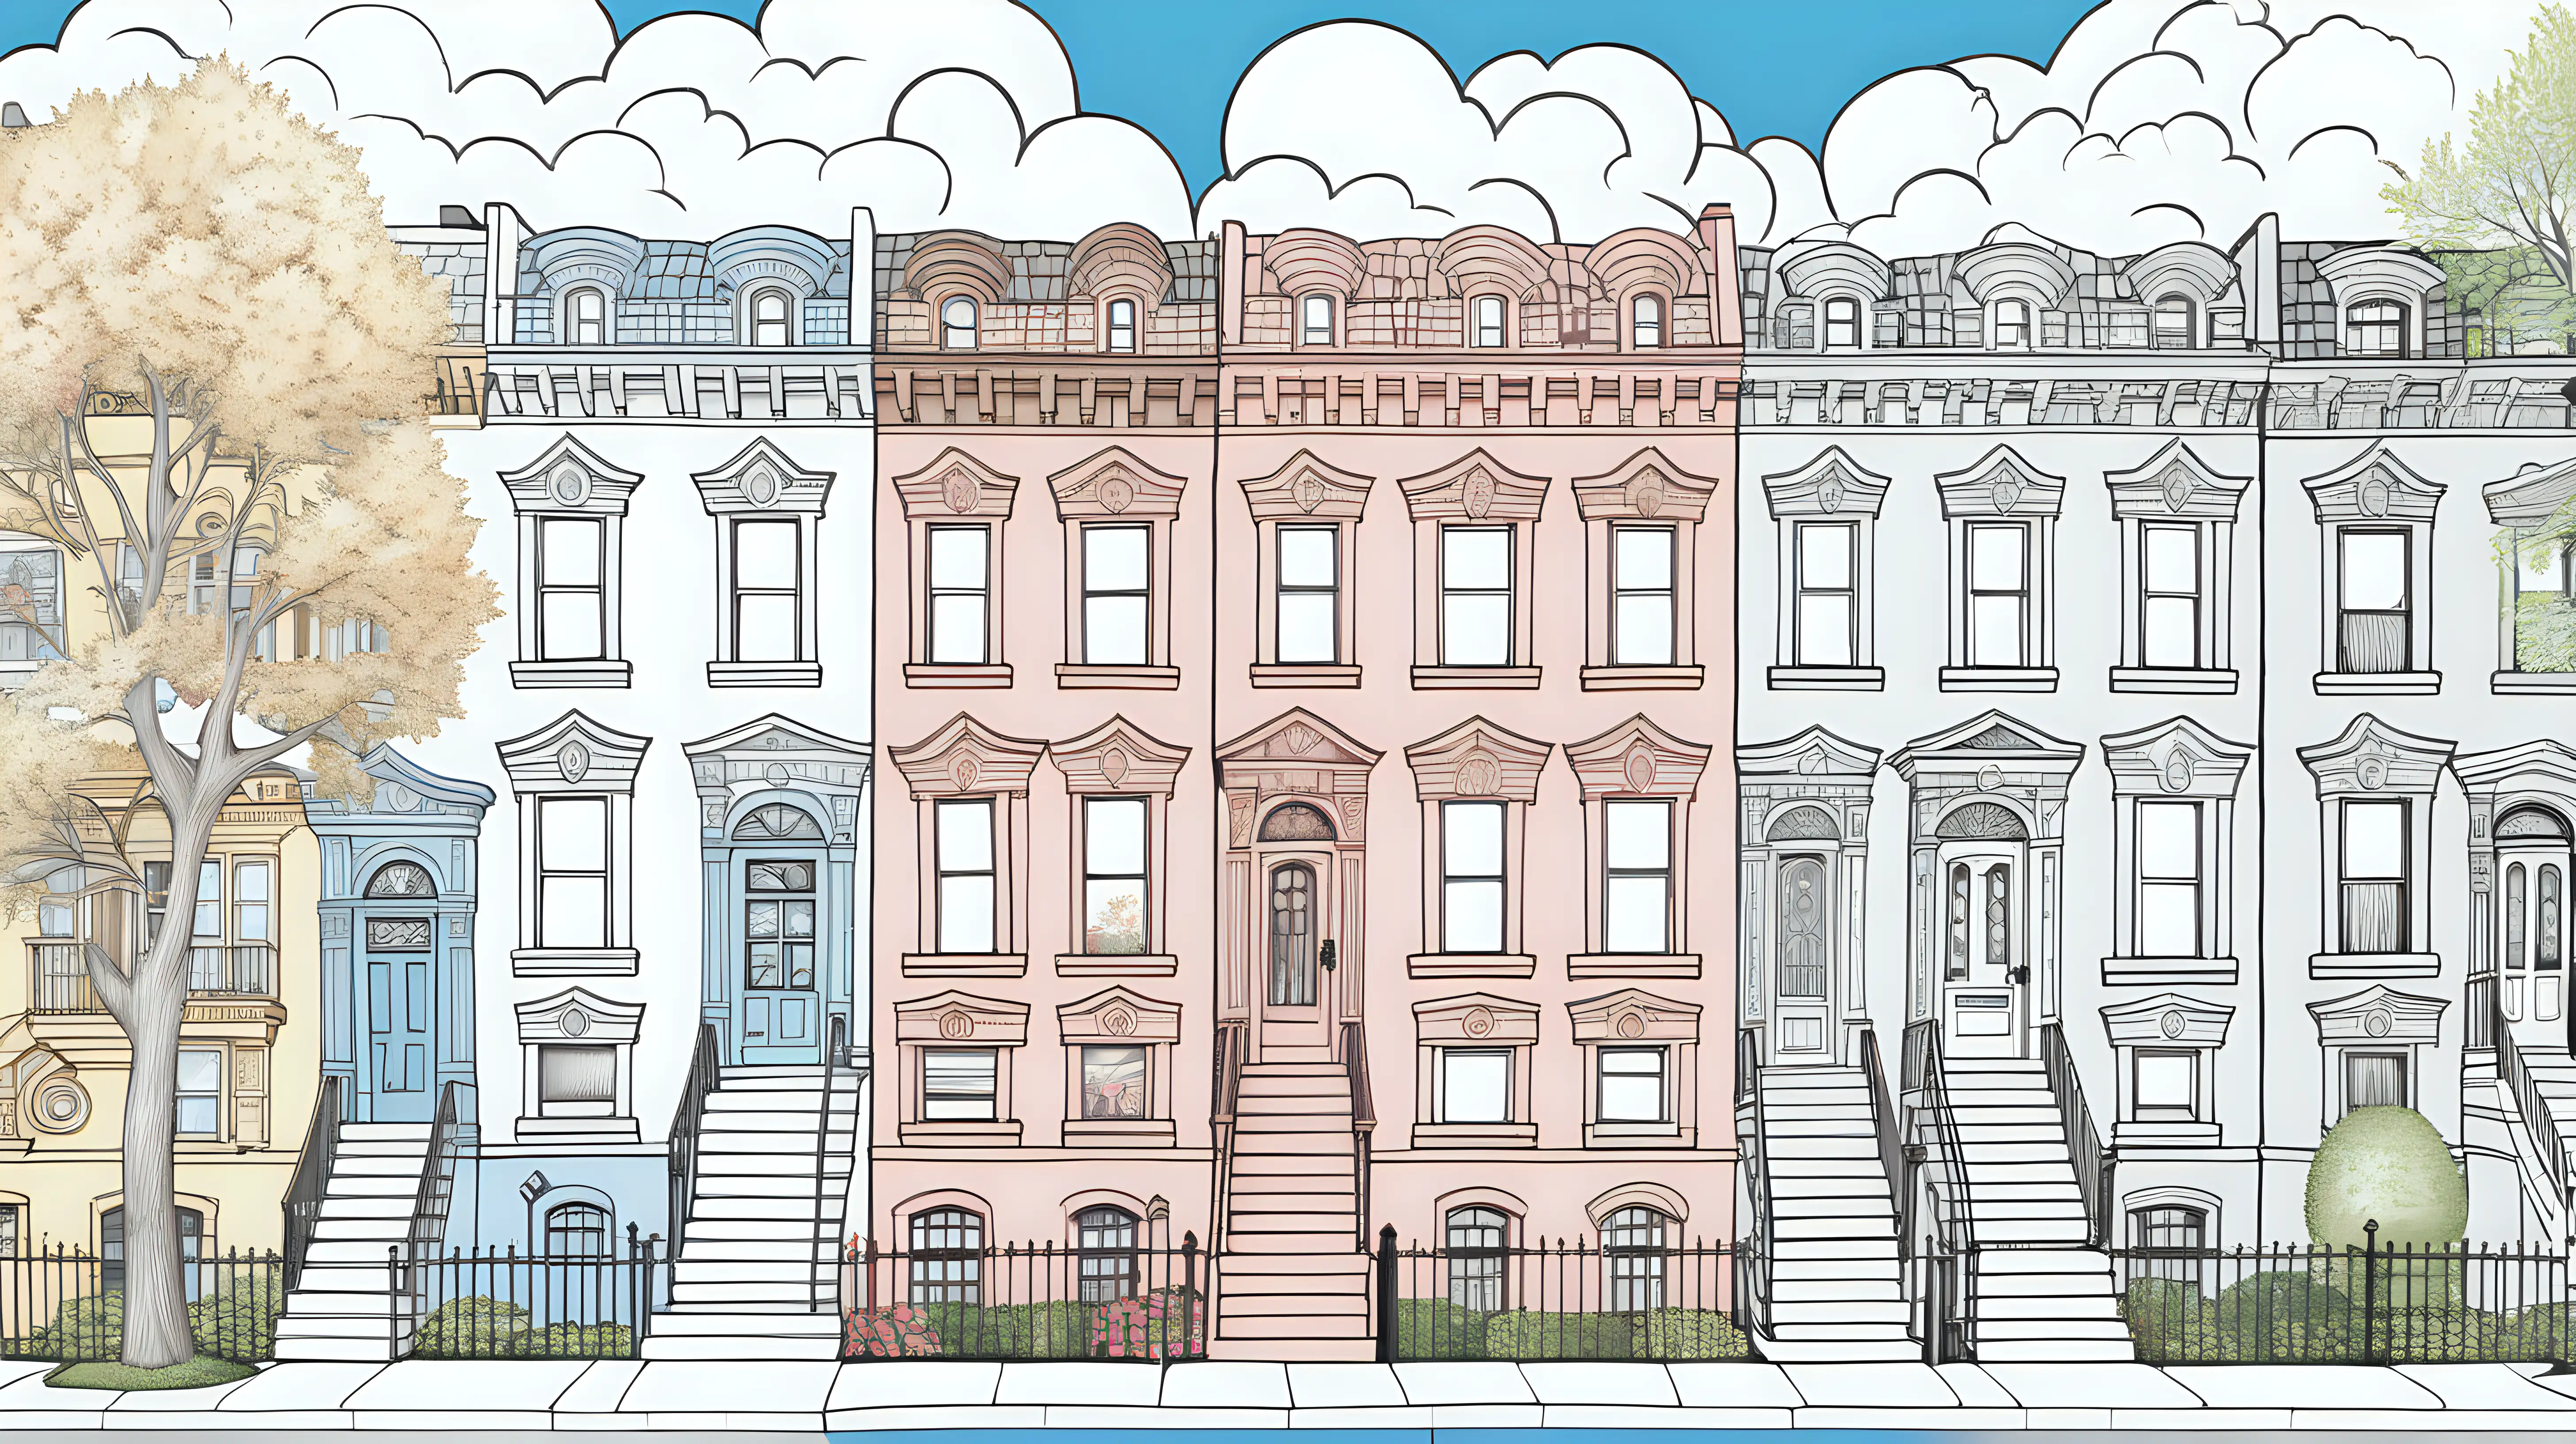 illustrated cover for a coloring book, partially colored in using pastel colors, new york city brownstone style townhouses aligned horizontally with nice symmetry, each a different color, pretty trees and flowers line the block, Some houses are colored in perfectly while others are half colored in, inviting readers to fill in the blanks with their imagination, Above is a playful sky with a sun and some clouds, image serves as the perfect wrap for a whimsical coloring book for young adults, clean lines for makes sharp details.